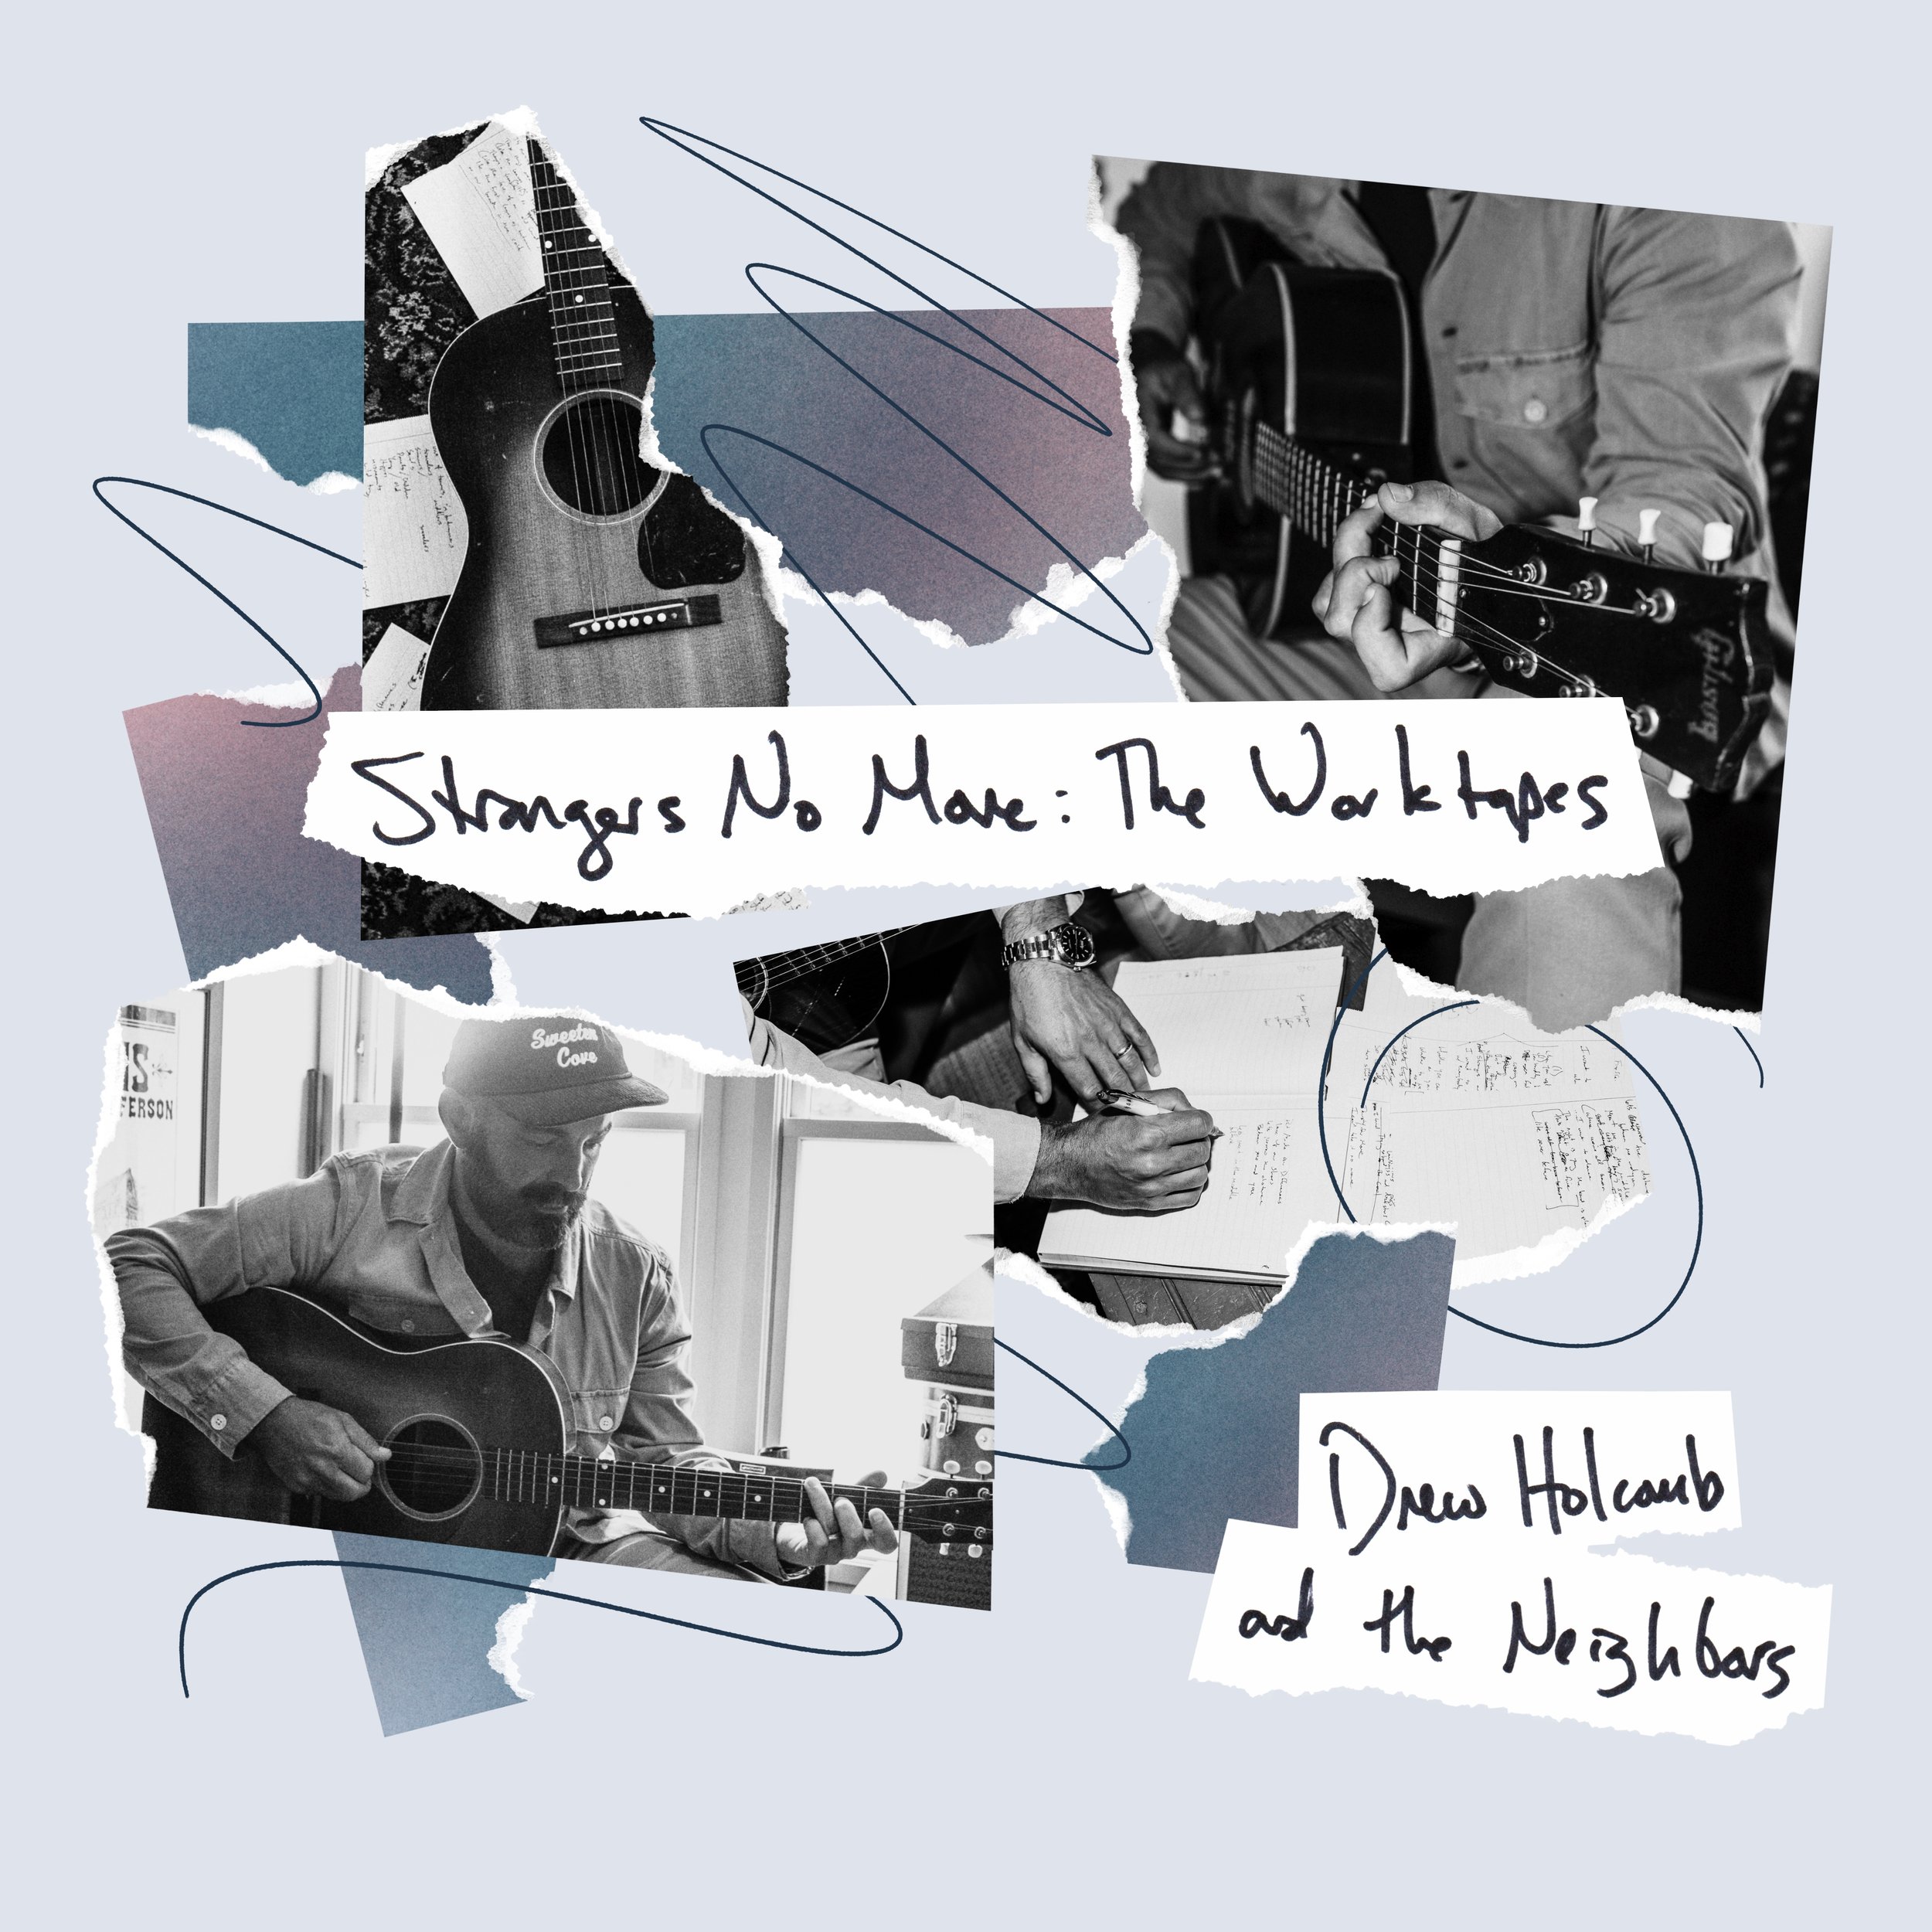 Drew Holcomb &amp; The Neighbors - Strangers No More: The Worktapes - EP